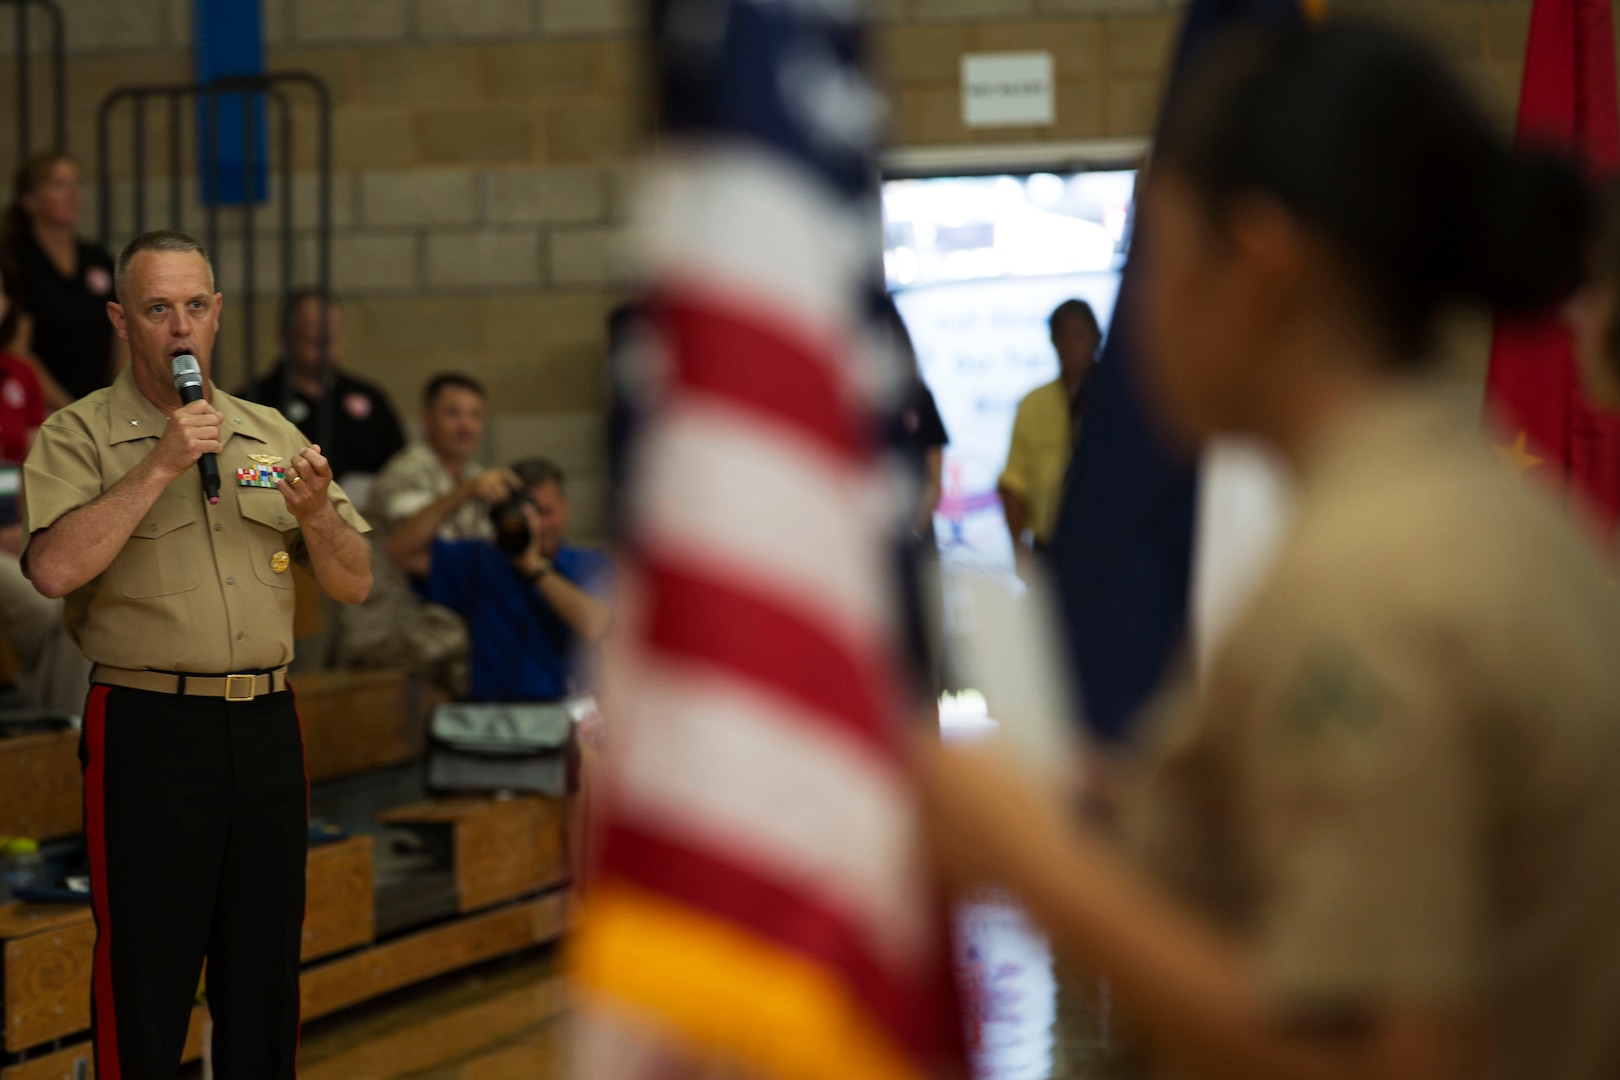 Brig. Gen. Kevin J. Killea, commanding general of Marine Corps Installations West and Marine Corps Base Camp Pendleton, delivers the opening remarks for the 2016 Conseil International Du Sport Militaire (CISM) World Military Women’s Basketball Championship tournament July 25 at Camp Pendleton, California. Camp Pendleton is hosting the CISM World Military Women’s Basketball Championship July 25 through July 29 to the opportunity for high-caliber U.S. service member athletes to be positively engaged with their peers from nations around the globe. (U.S. Marine Corps photo by Sgt. Abbey Perria)